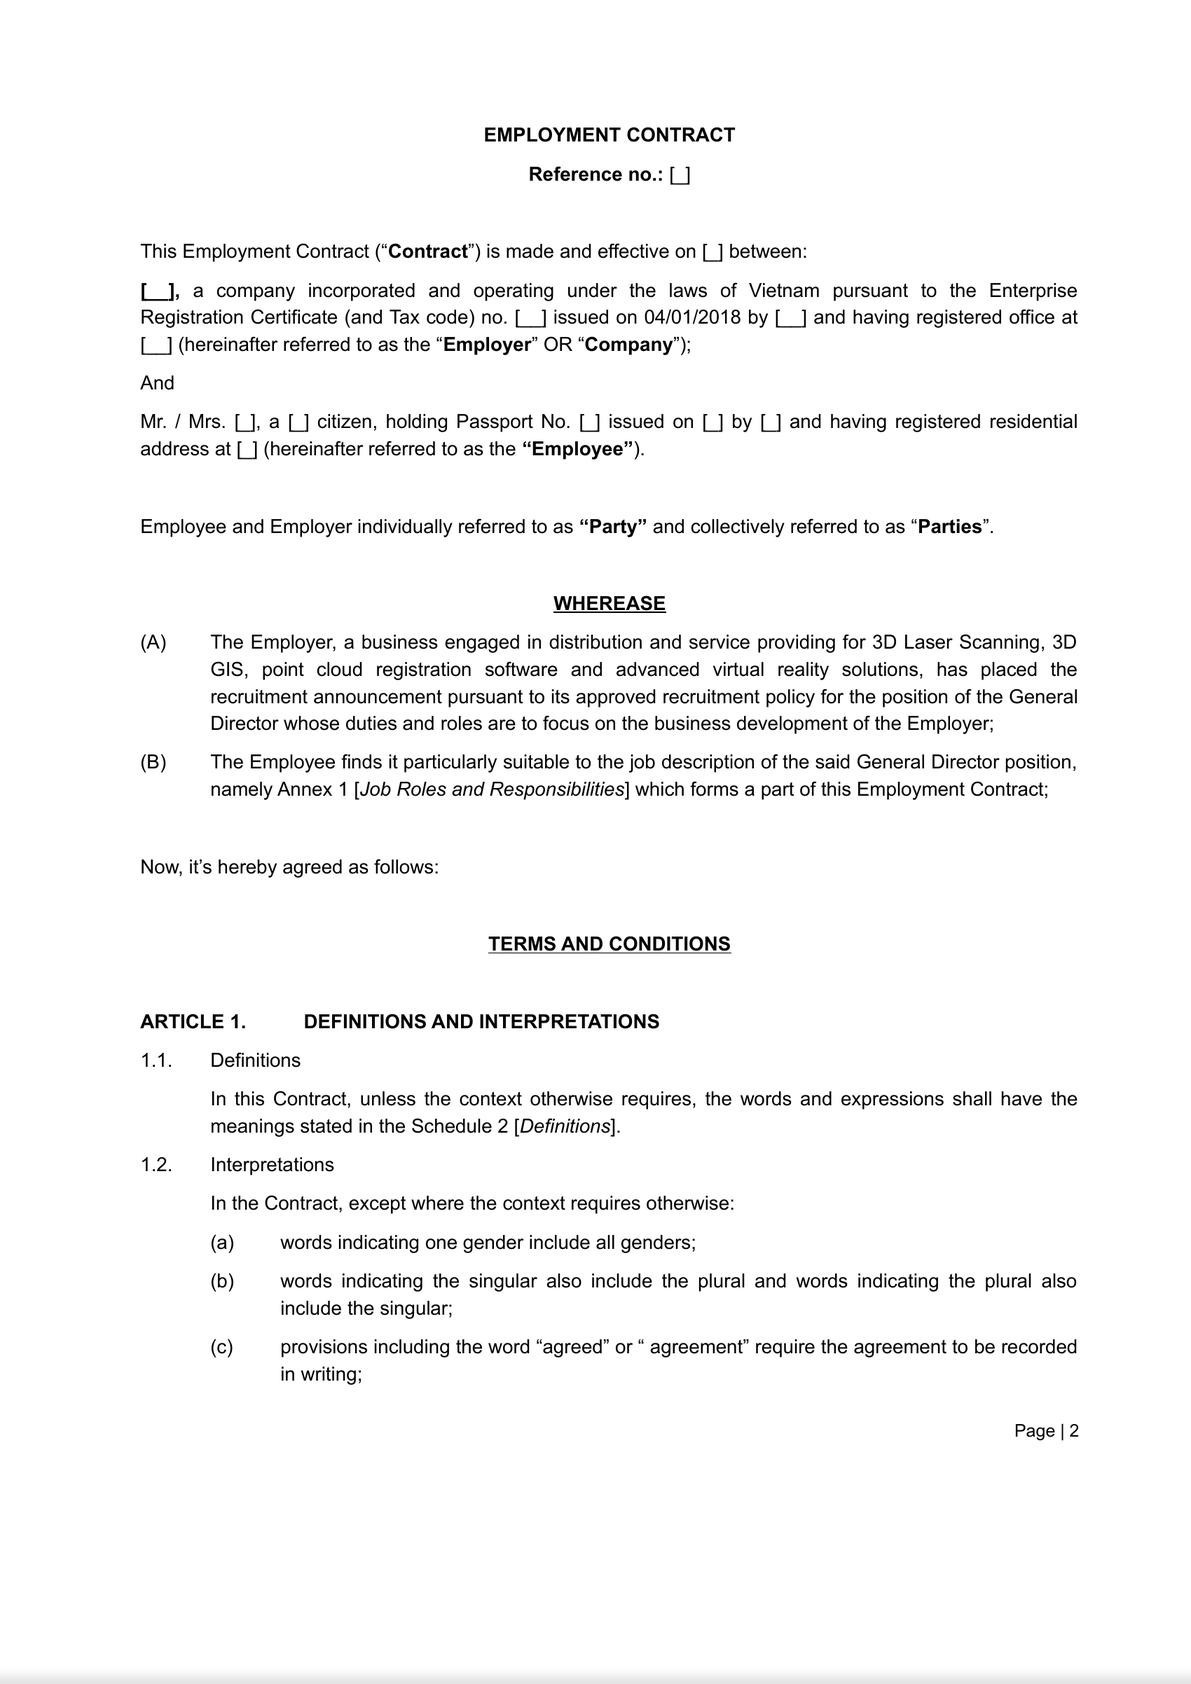 EMPLOYMENT CONTRACT-1